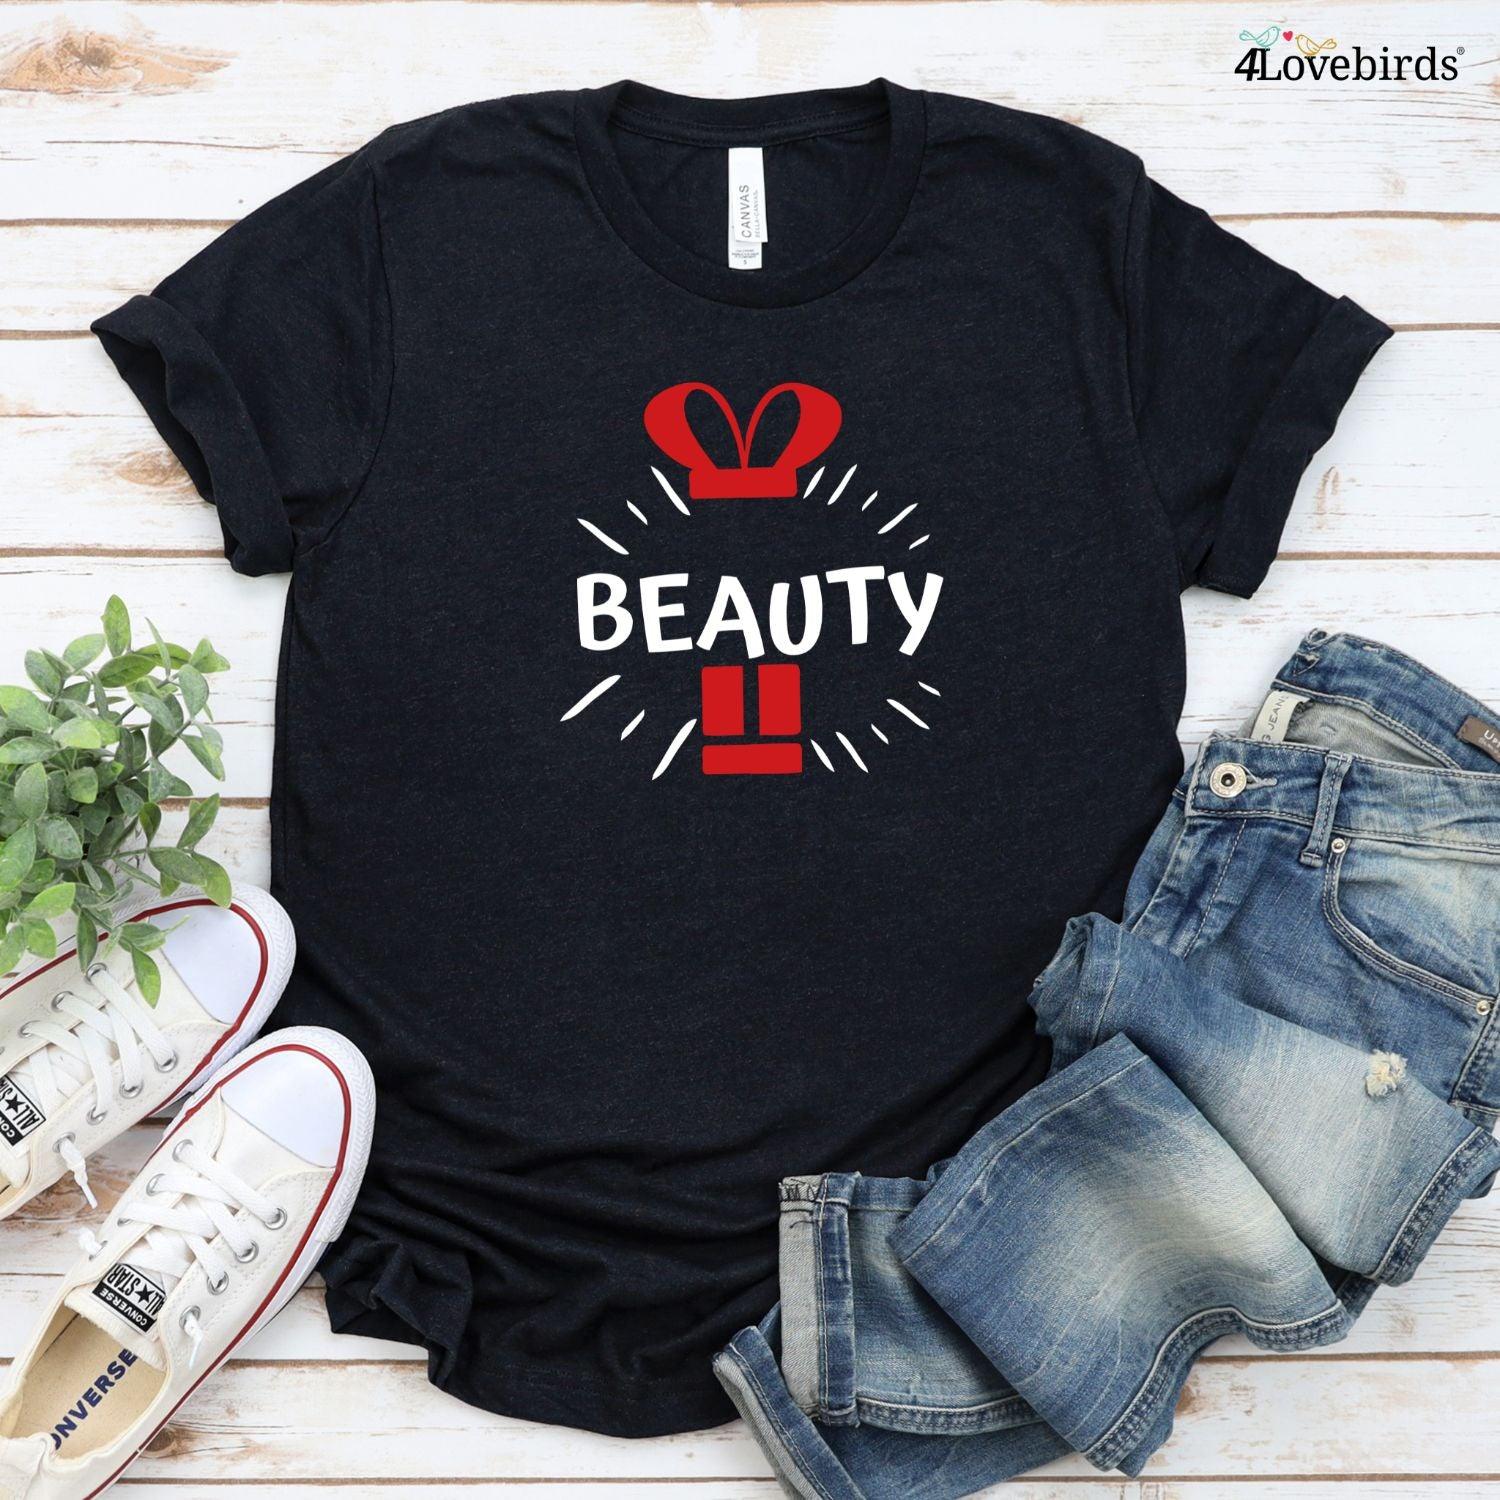 Charming Beauty & Beast Duo Set - Adorable Matching Outfits for Couples' Delight! - 4Lovebirds